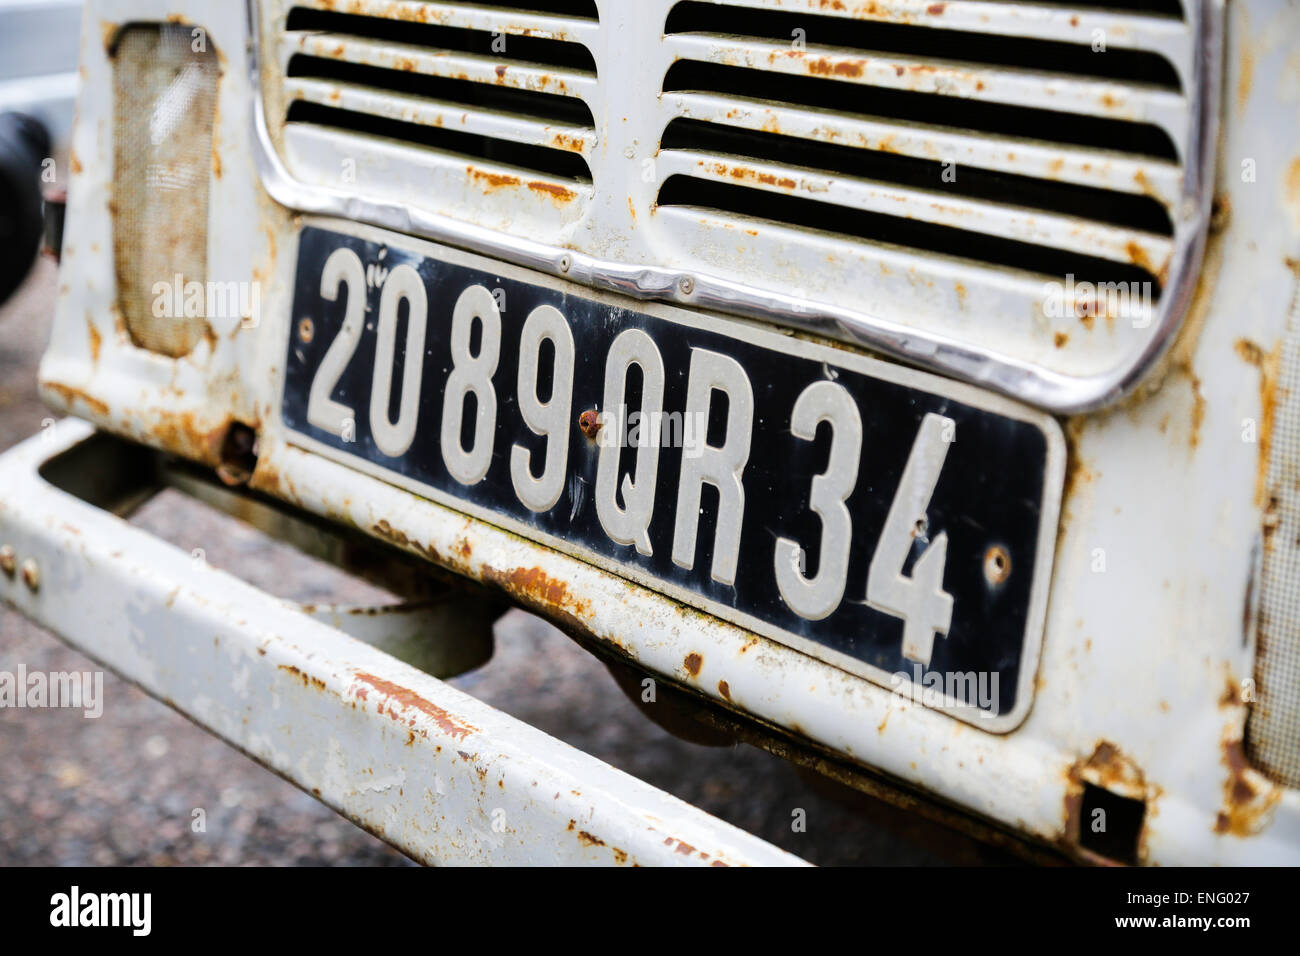 A French number plate on an old Citroen van Stock Photo